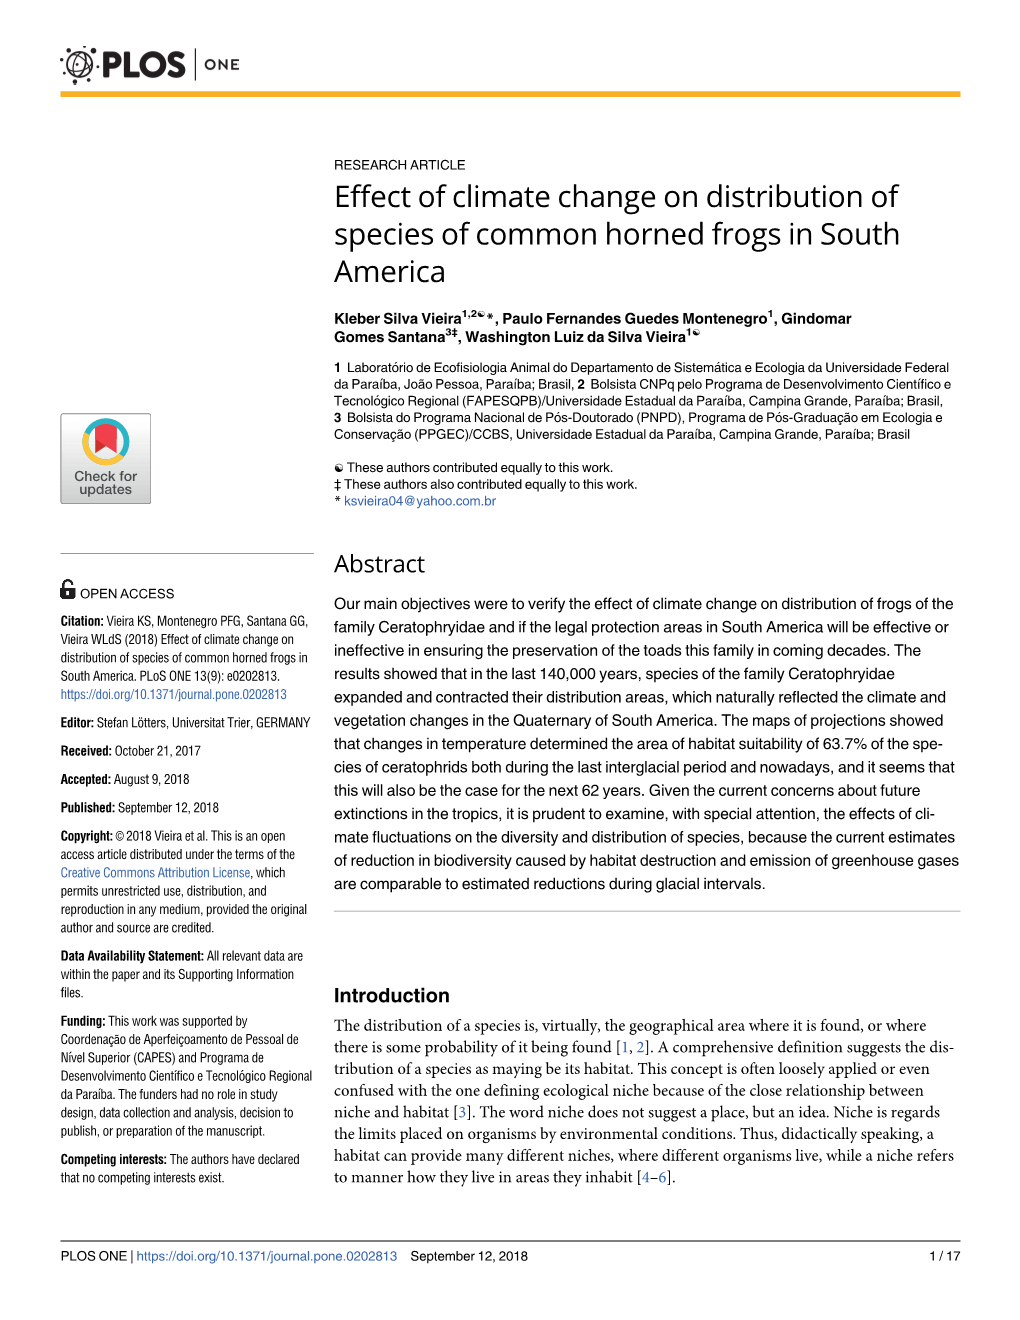 Effect of Climate Change on Distribution of Species of Common Horned Frogs in South America